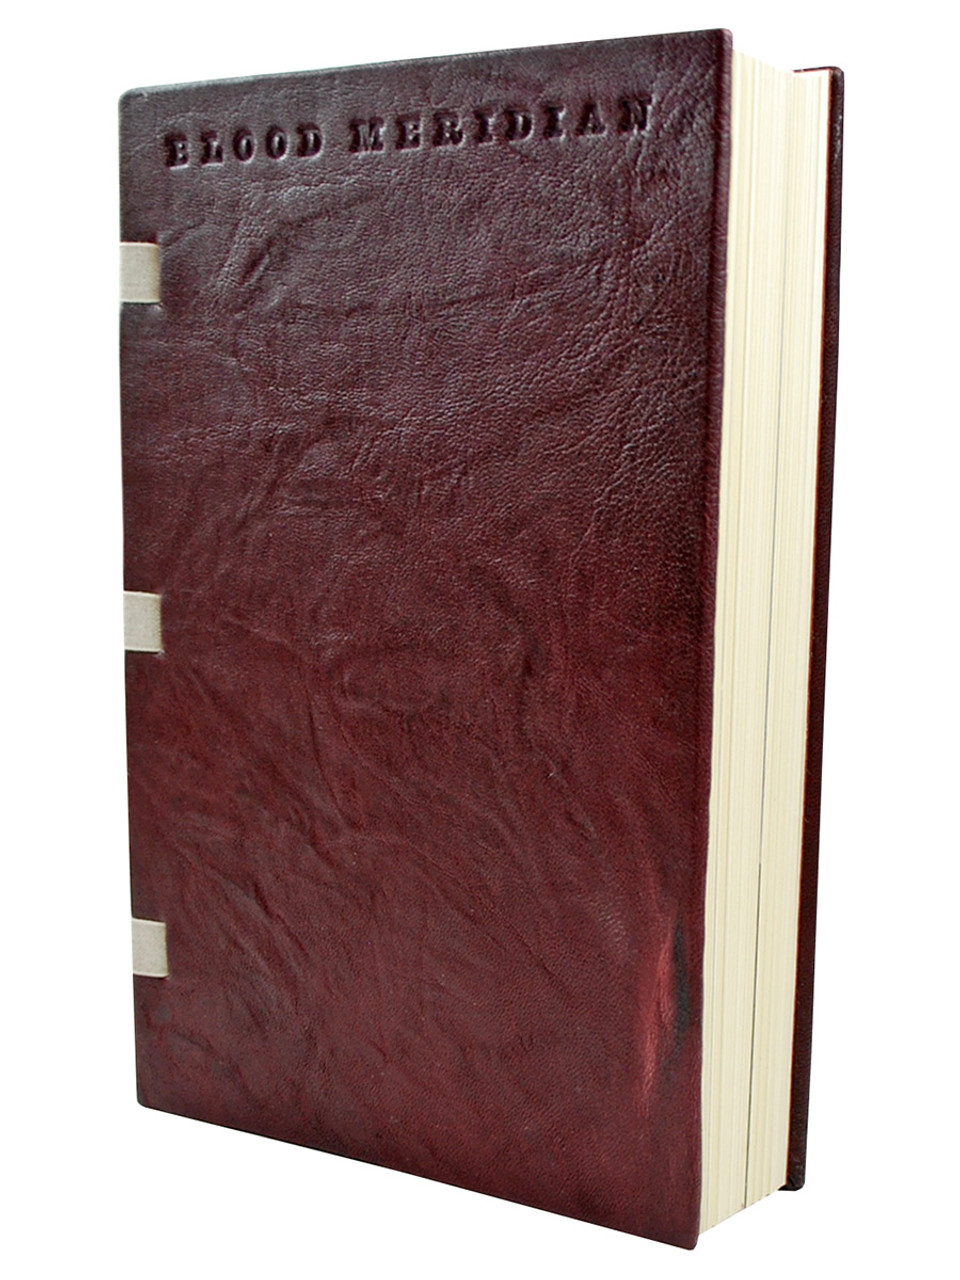 Cormac McCarthy "Blood Meridian" Signed Limited Numbered Edition,  Leather Bound, No. 71 of 350 Tray-cased [Very Fine]